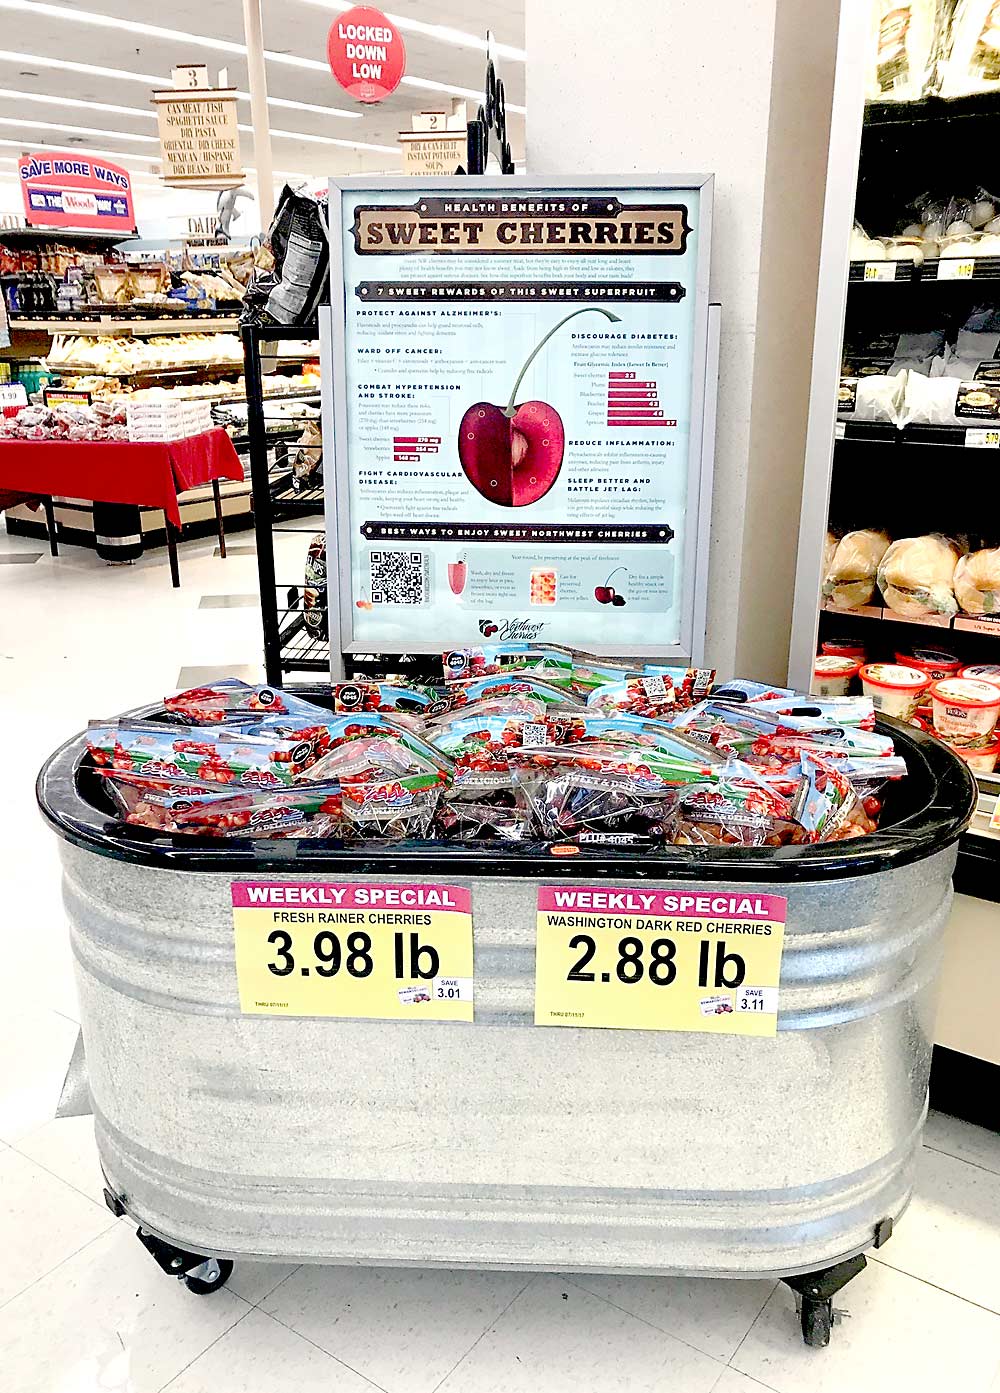 In-store promotions, such as this Northwest Cherry Growers health marketing display in a Missouri Woods Supermarket, will continue in coordination with promoting online sales. (Courtesy Northwest Cherry Growers)